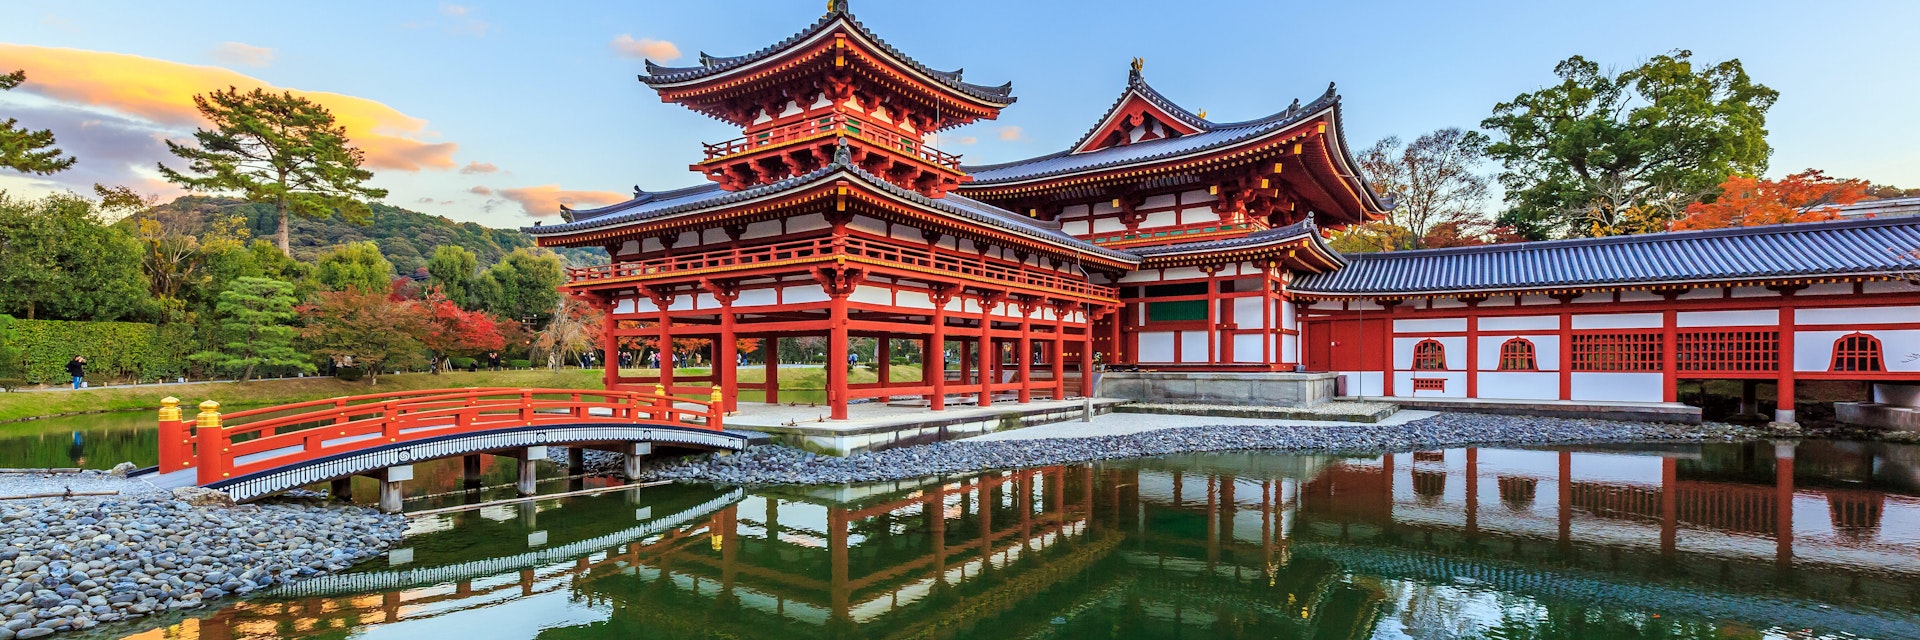 Byodo-In or Byodoin Temple Buddhist temple, Unesco World Heritage Site, Phoenix Hall building, Uji, Kyoto, Japan.; Shutterstock ID 763950445; your: Bridget Brown; gl: 65050; netsuite: Online Editorial; full: POI Image Update